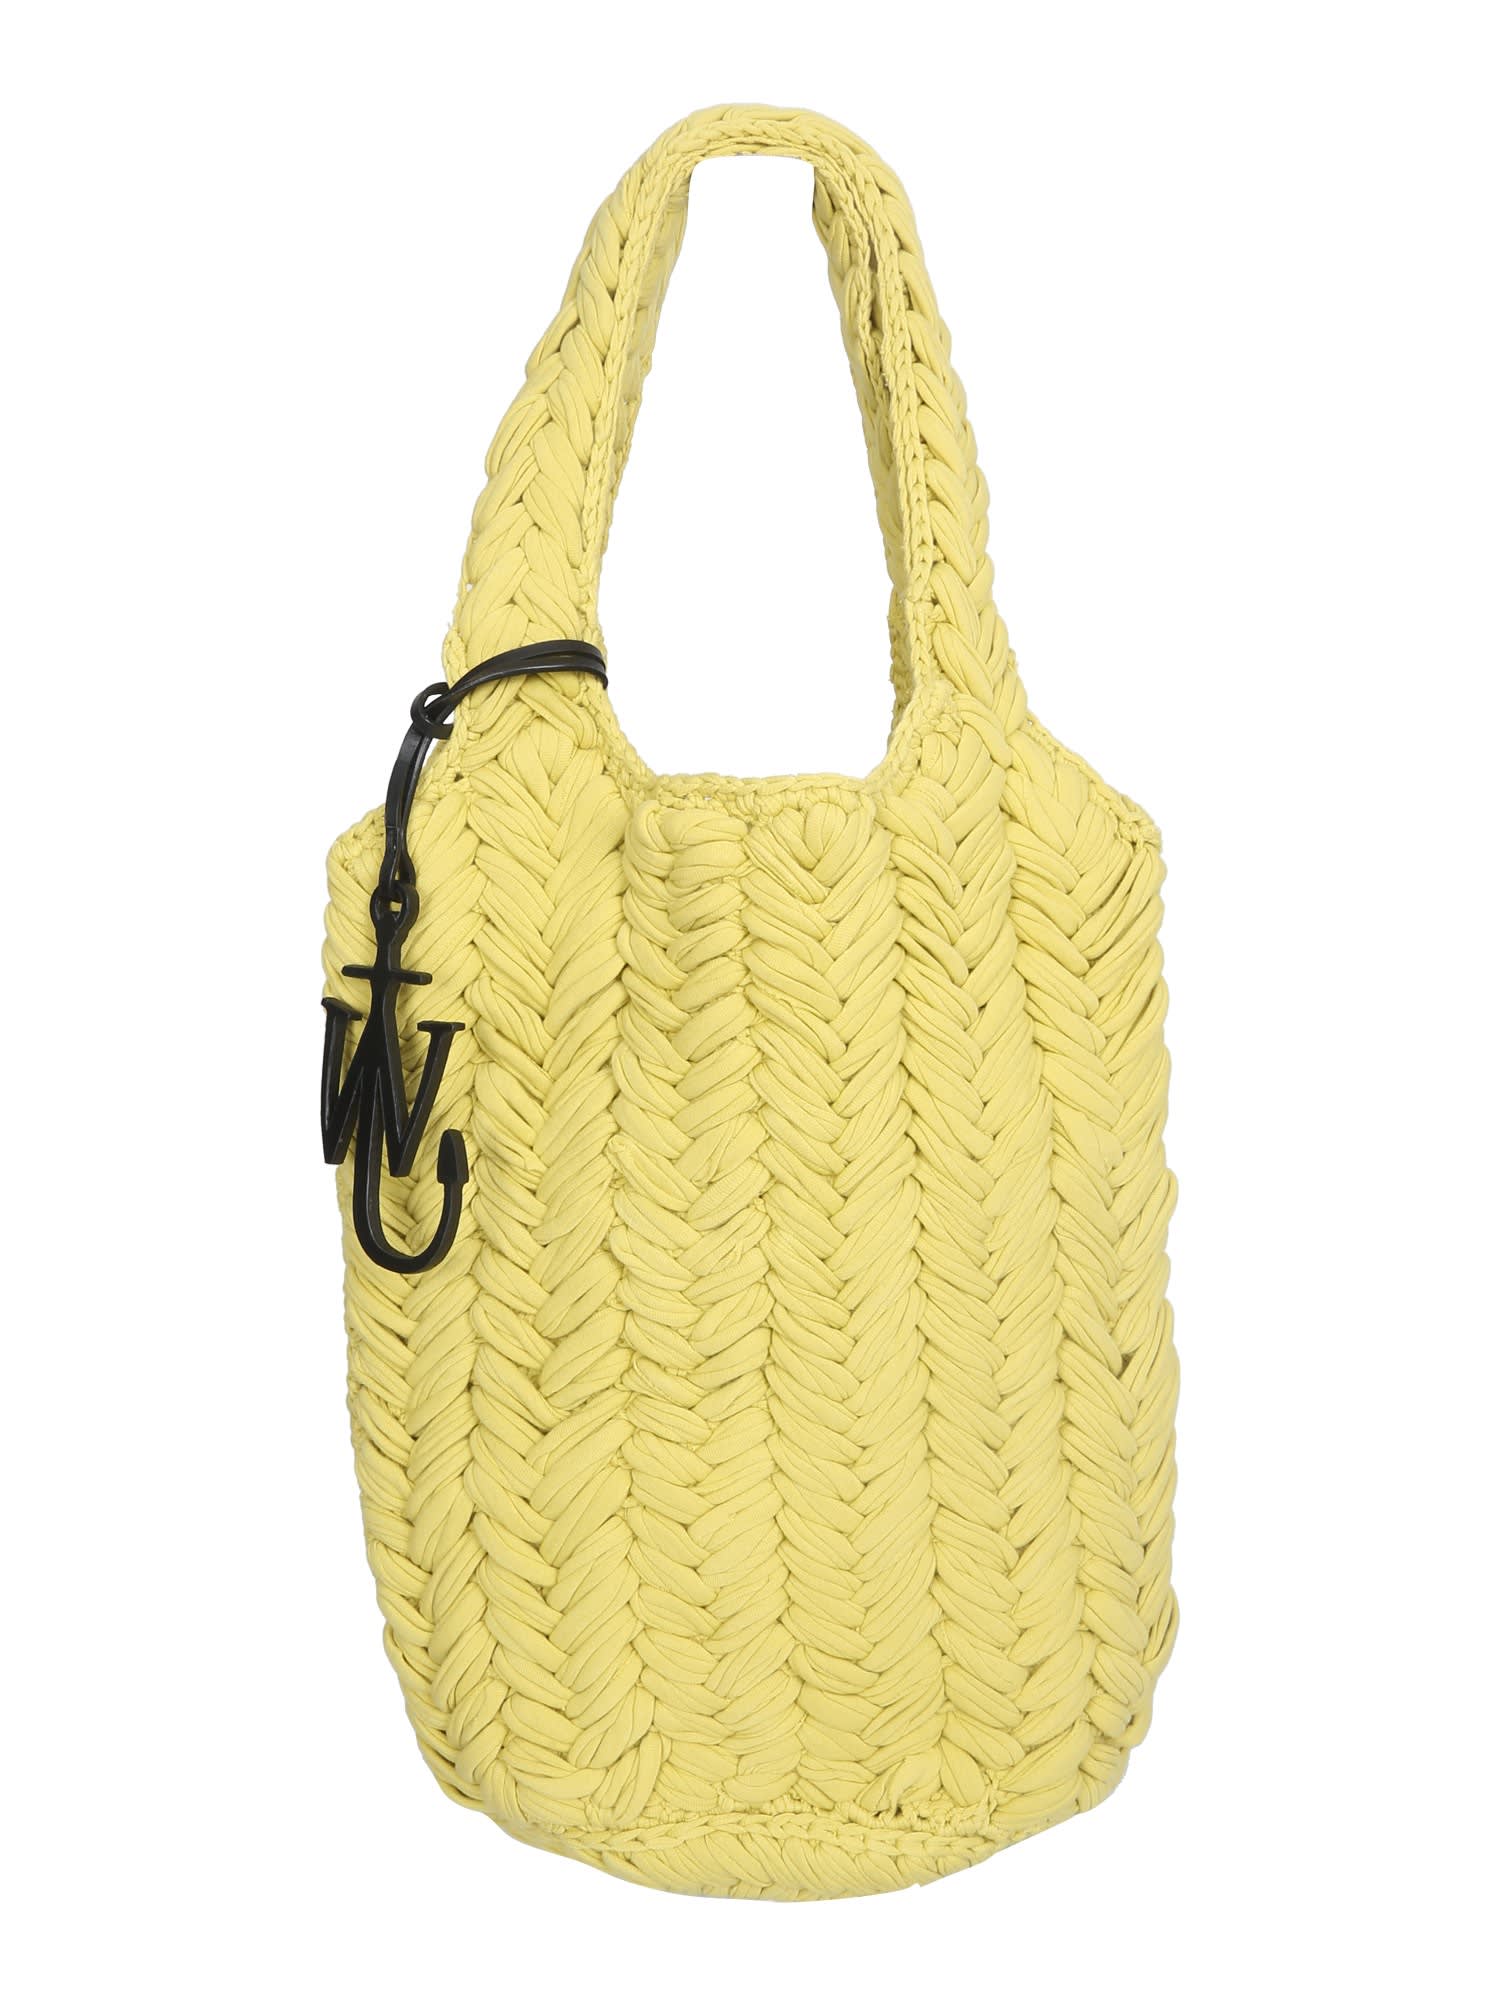 J.W. Anderson Woven Shopping Bag